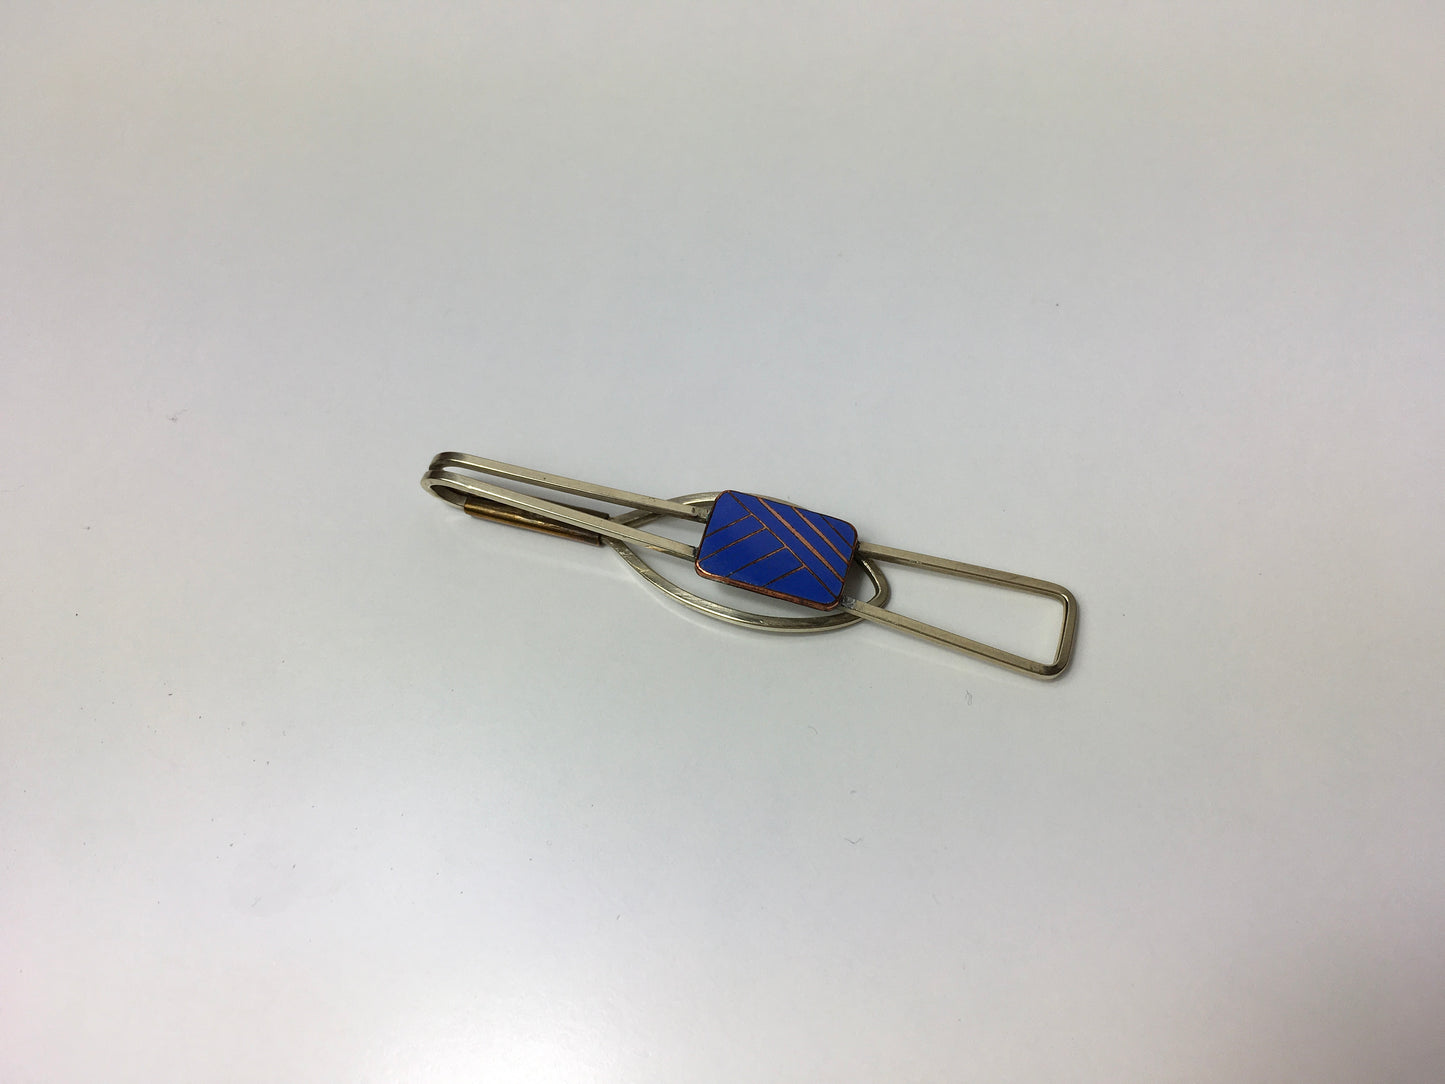 Original Gents Tie Pin - Lovely Shape and Has A contrast Geometric Blue to the Front